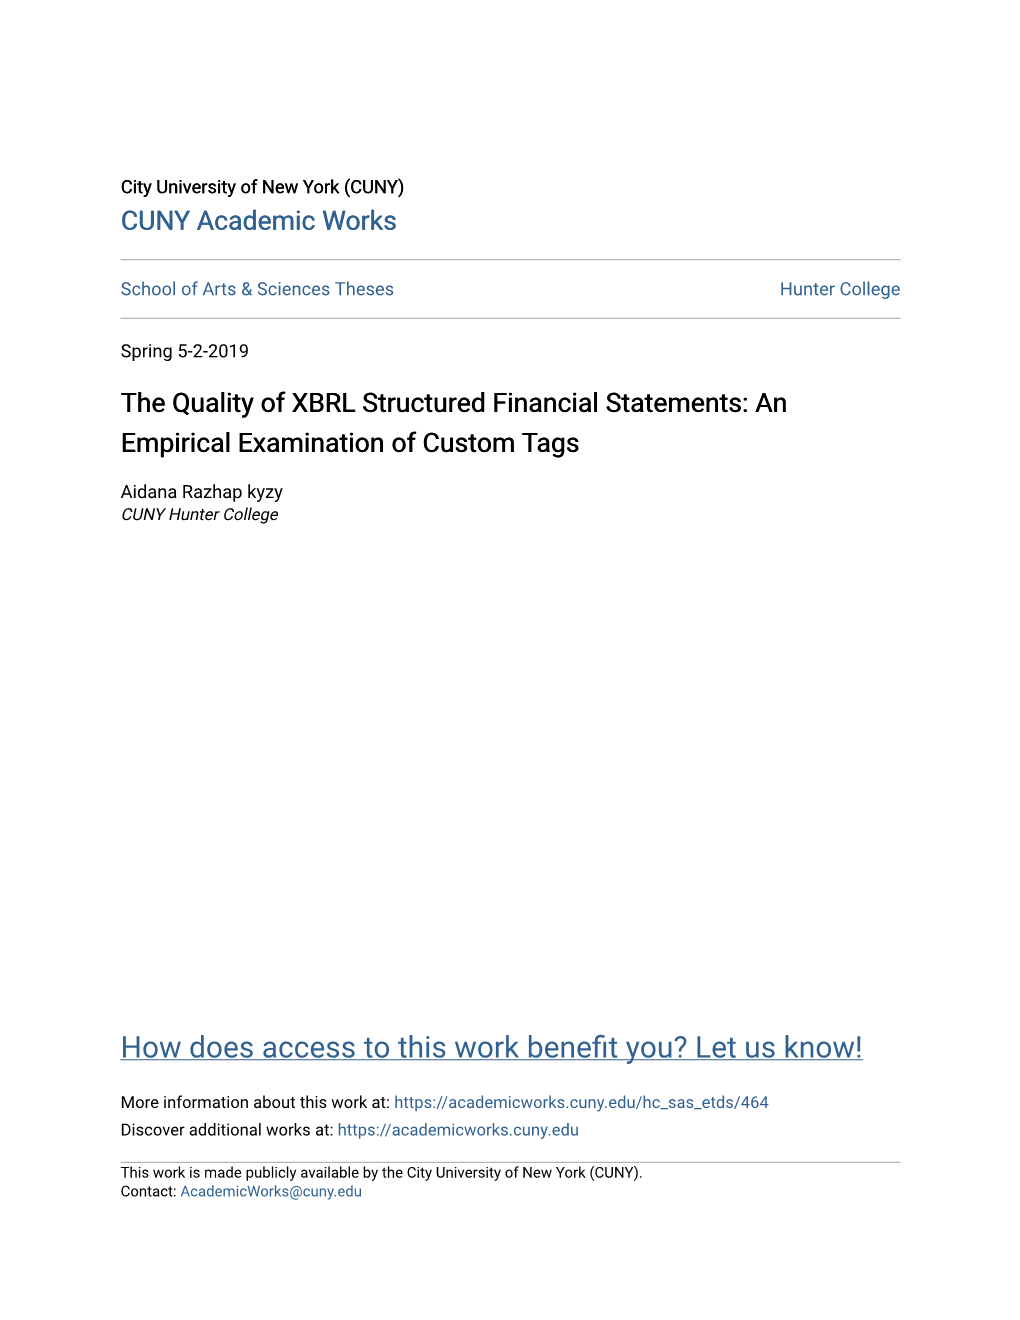 The Quality of XBRL Structured Financial Statements: an Empirical Examination of Custom Tags